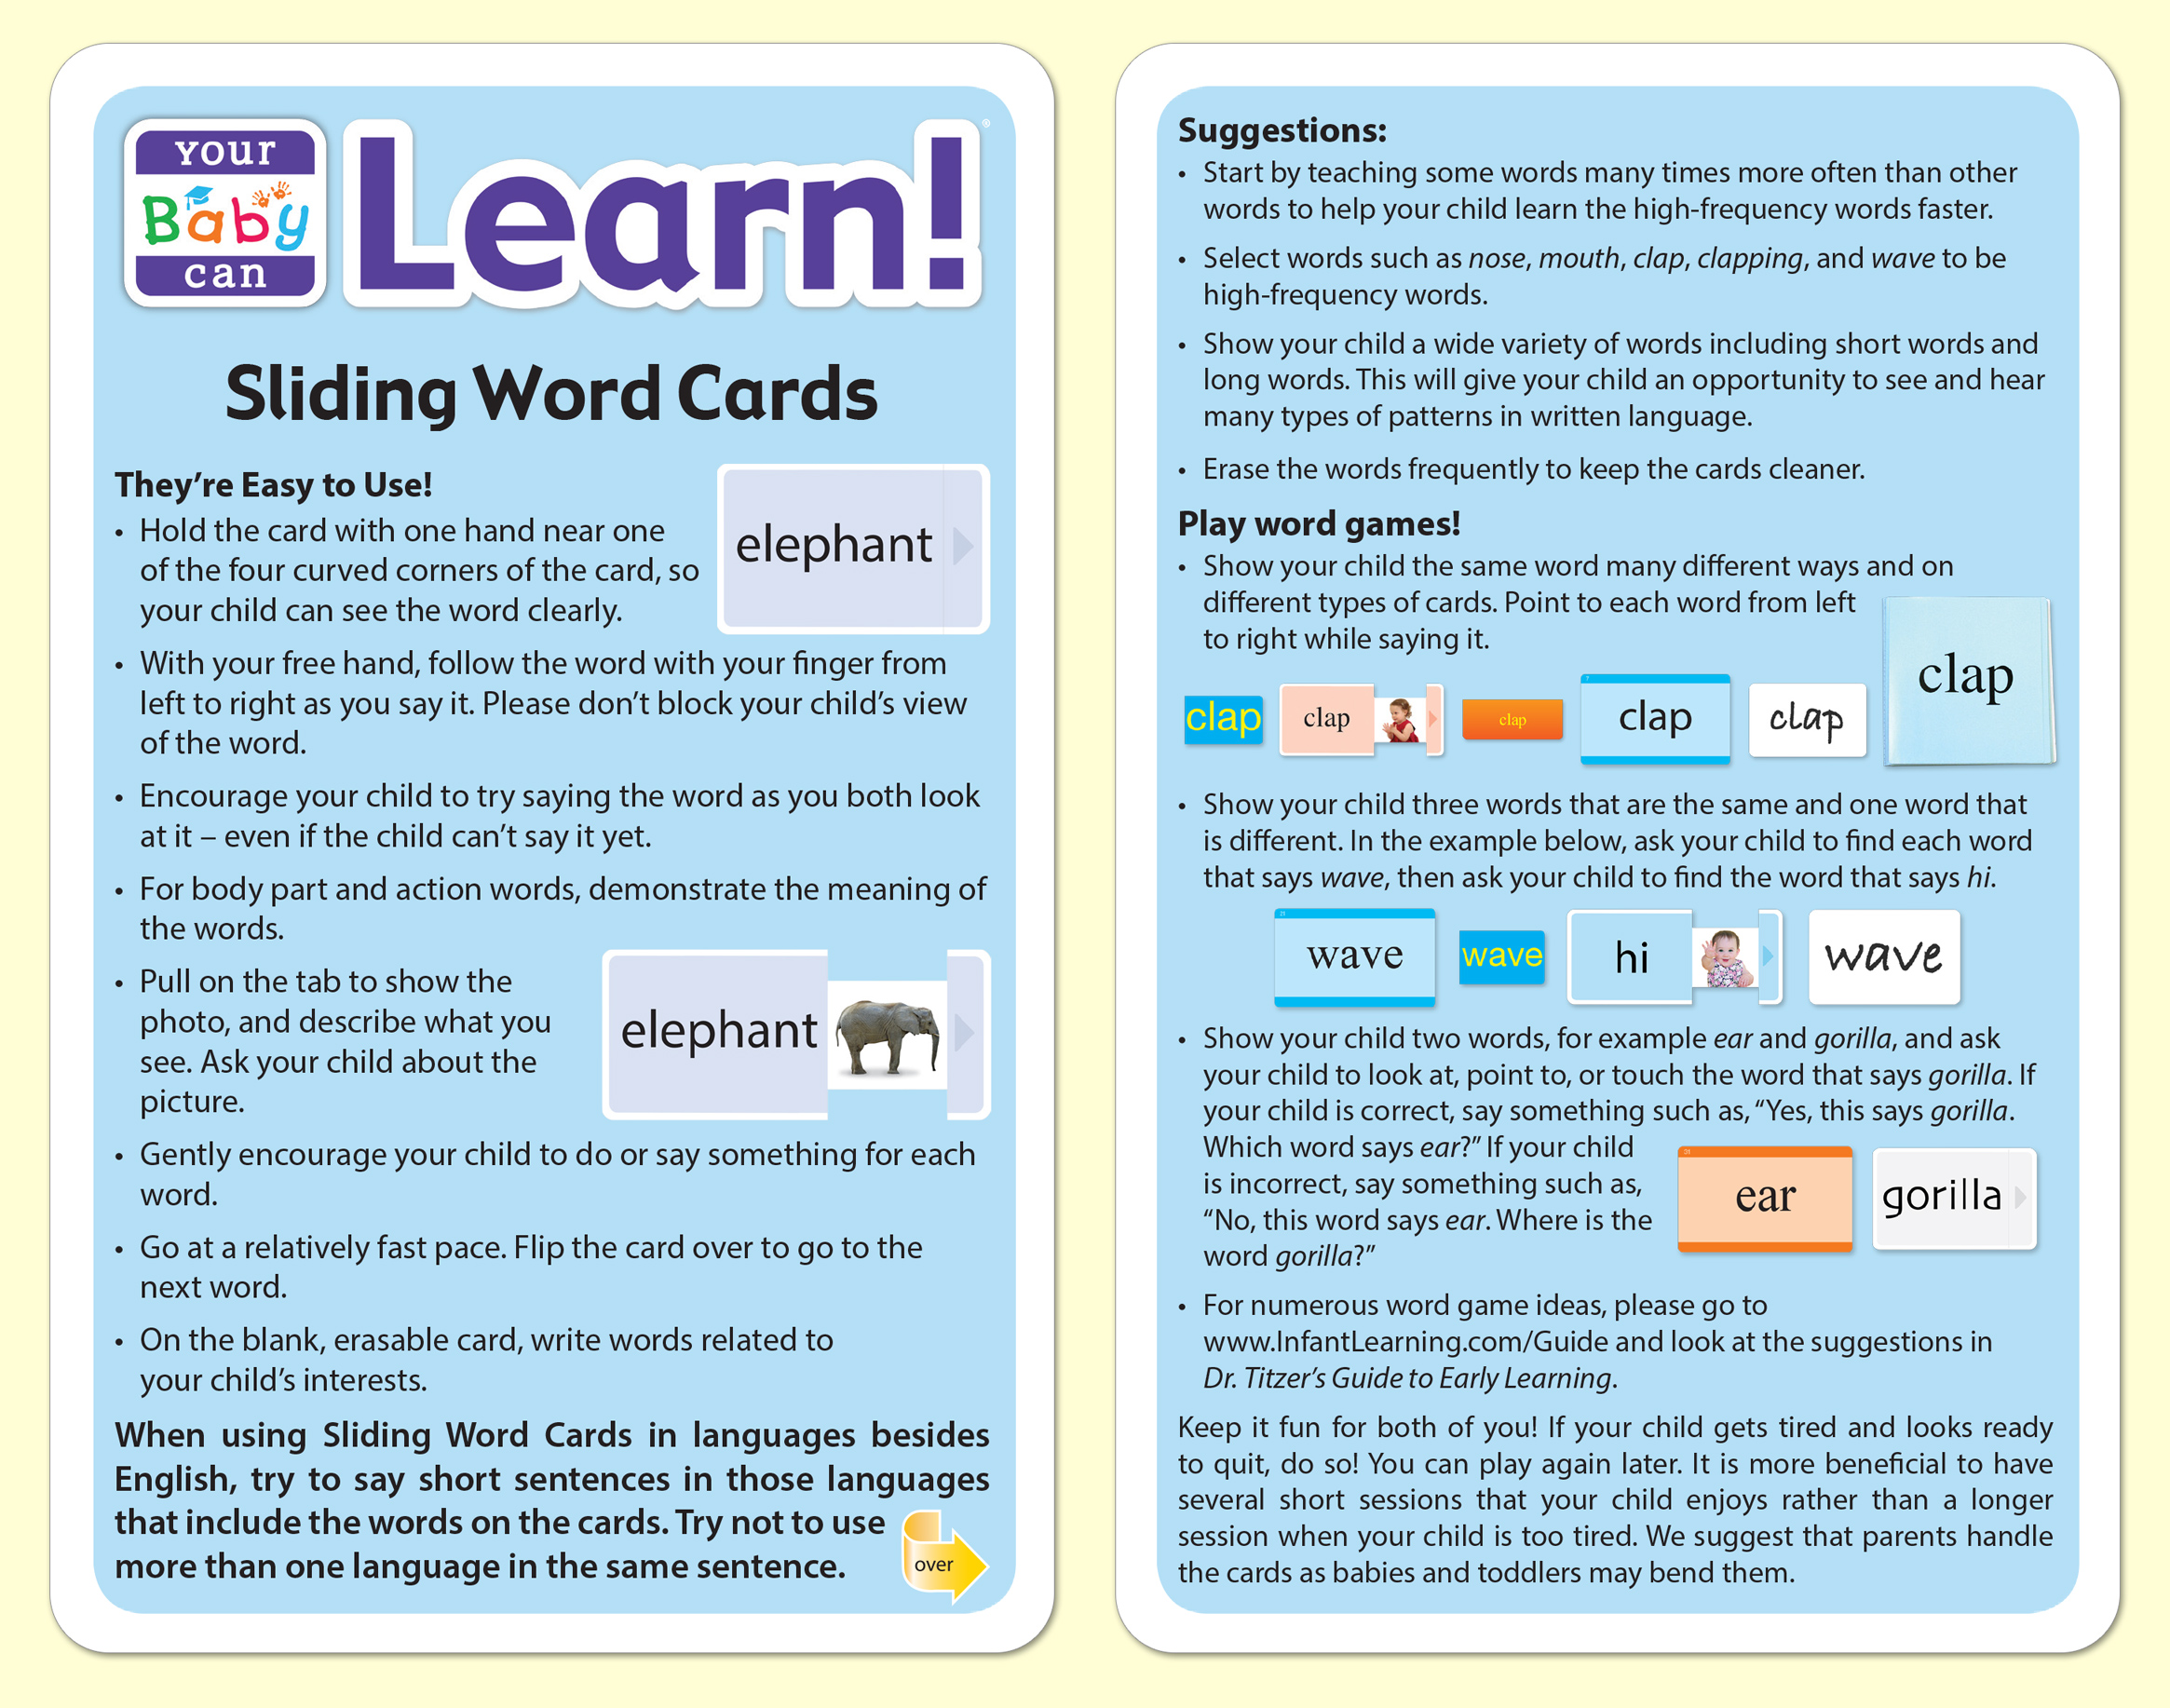 Click on this image to see the PDF of Lift-the-Flap Card Instructions